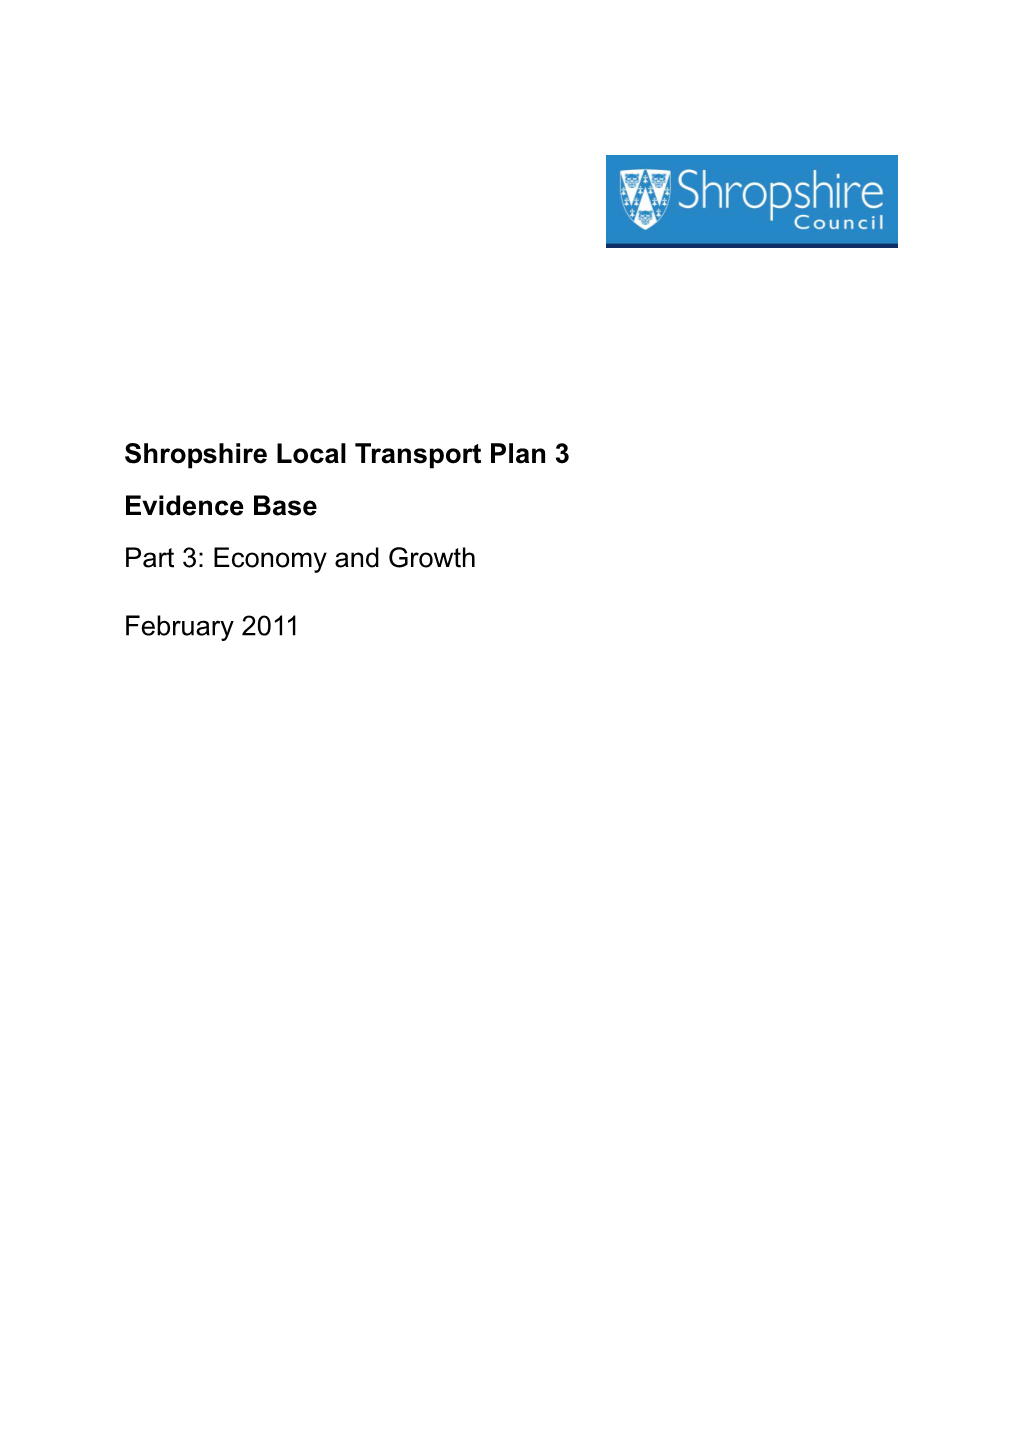 Shropshire Local Transport Plan 3 Evidence Base Part 3: Economy and Growth February 2011